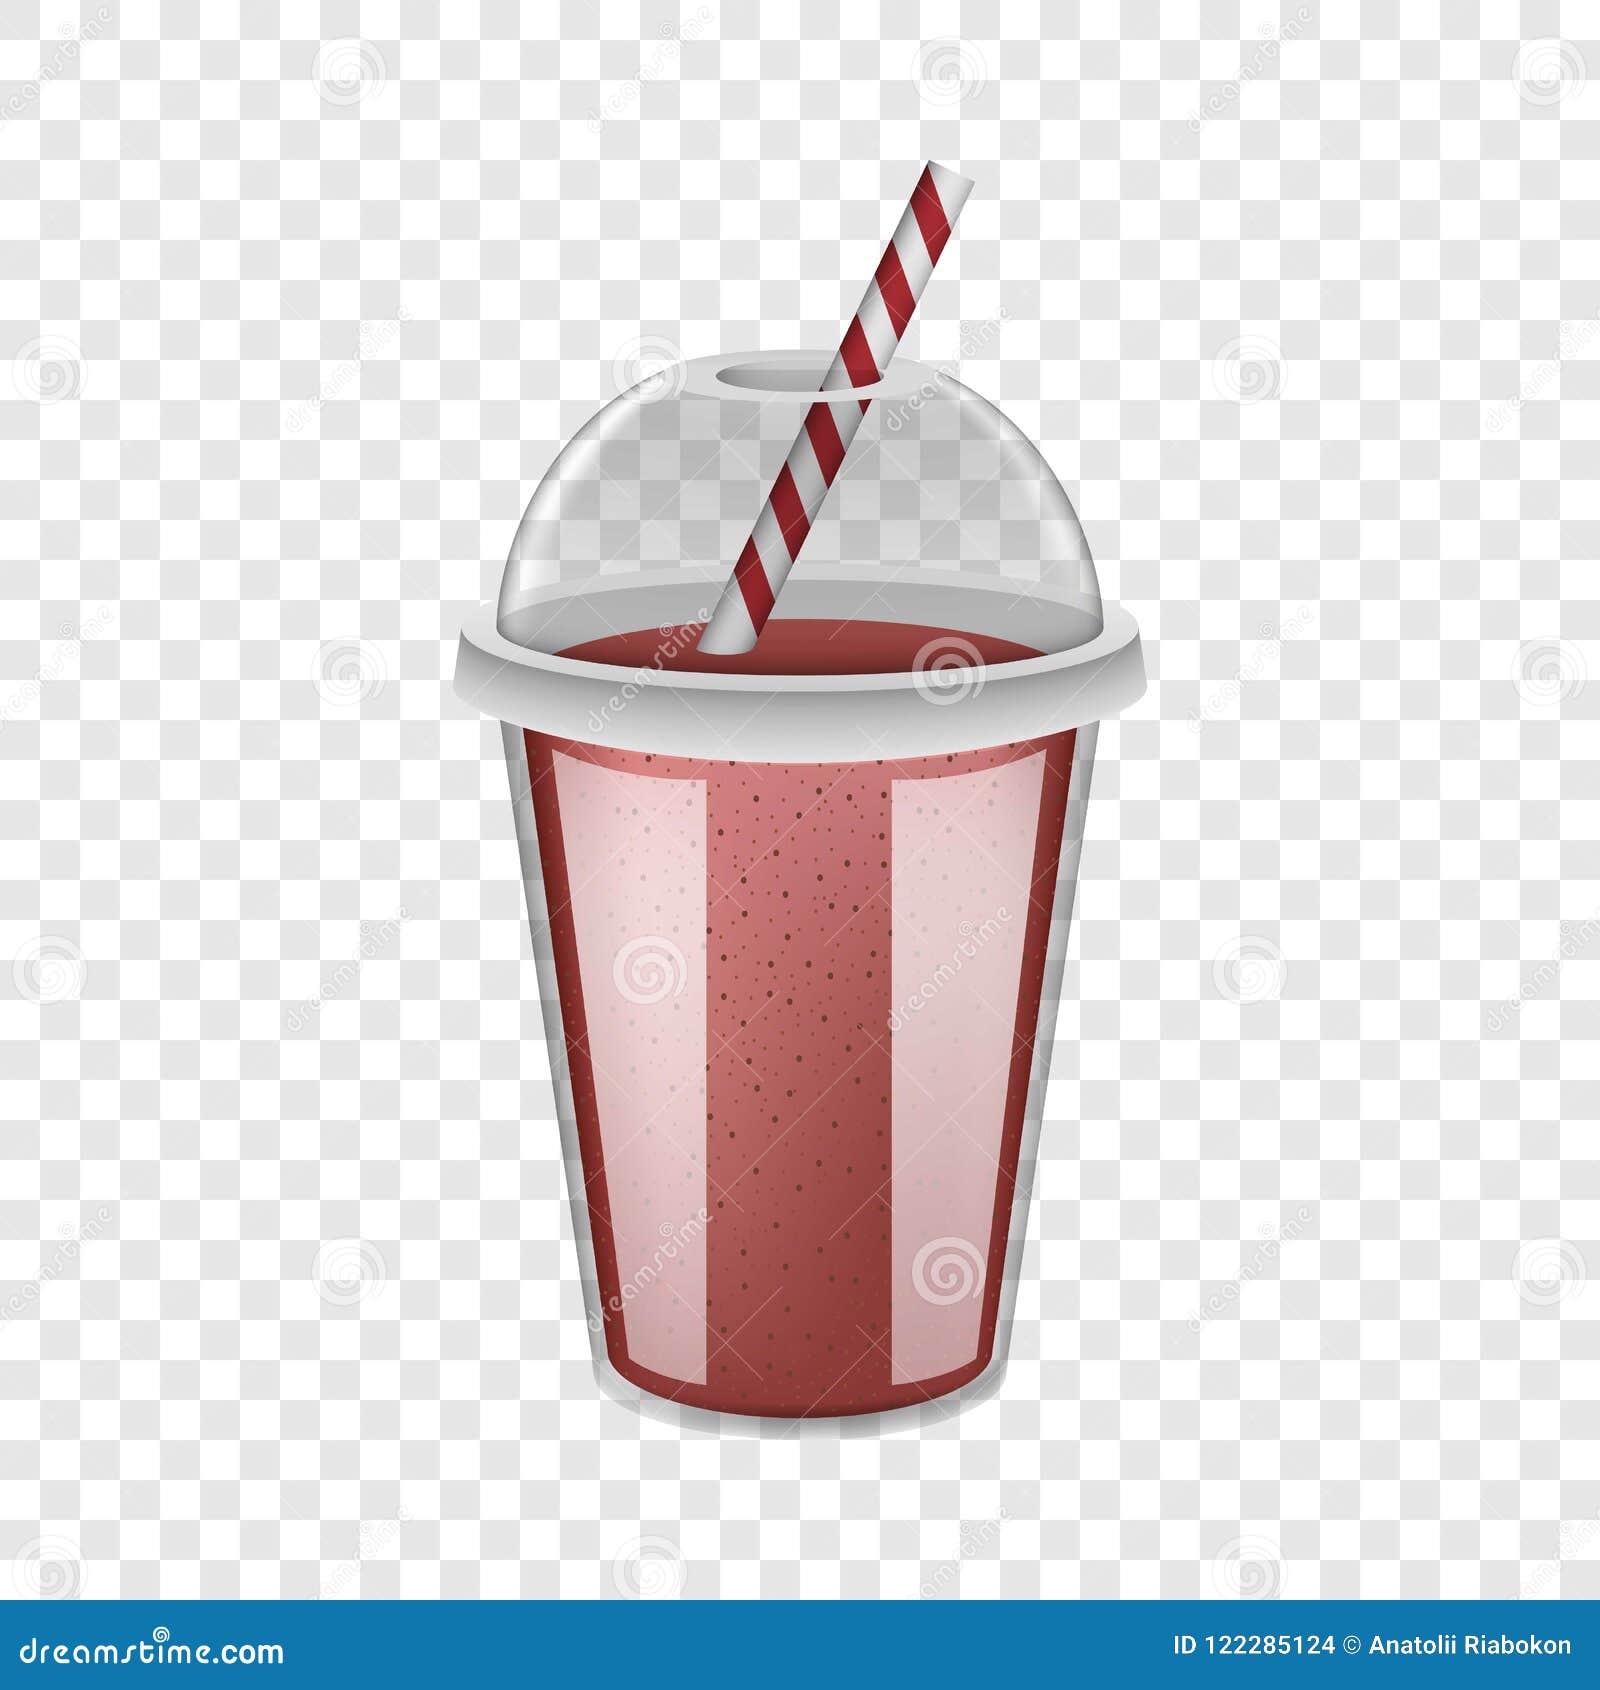 https://thumbs.dreamstime.com/z/plastic-cup-red-smoothie-mockup-realistic-style-plastic-cup-red-smoothie-mockup-realistic-illustration-plastic-cup-red-smoothie-122285124.jpg